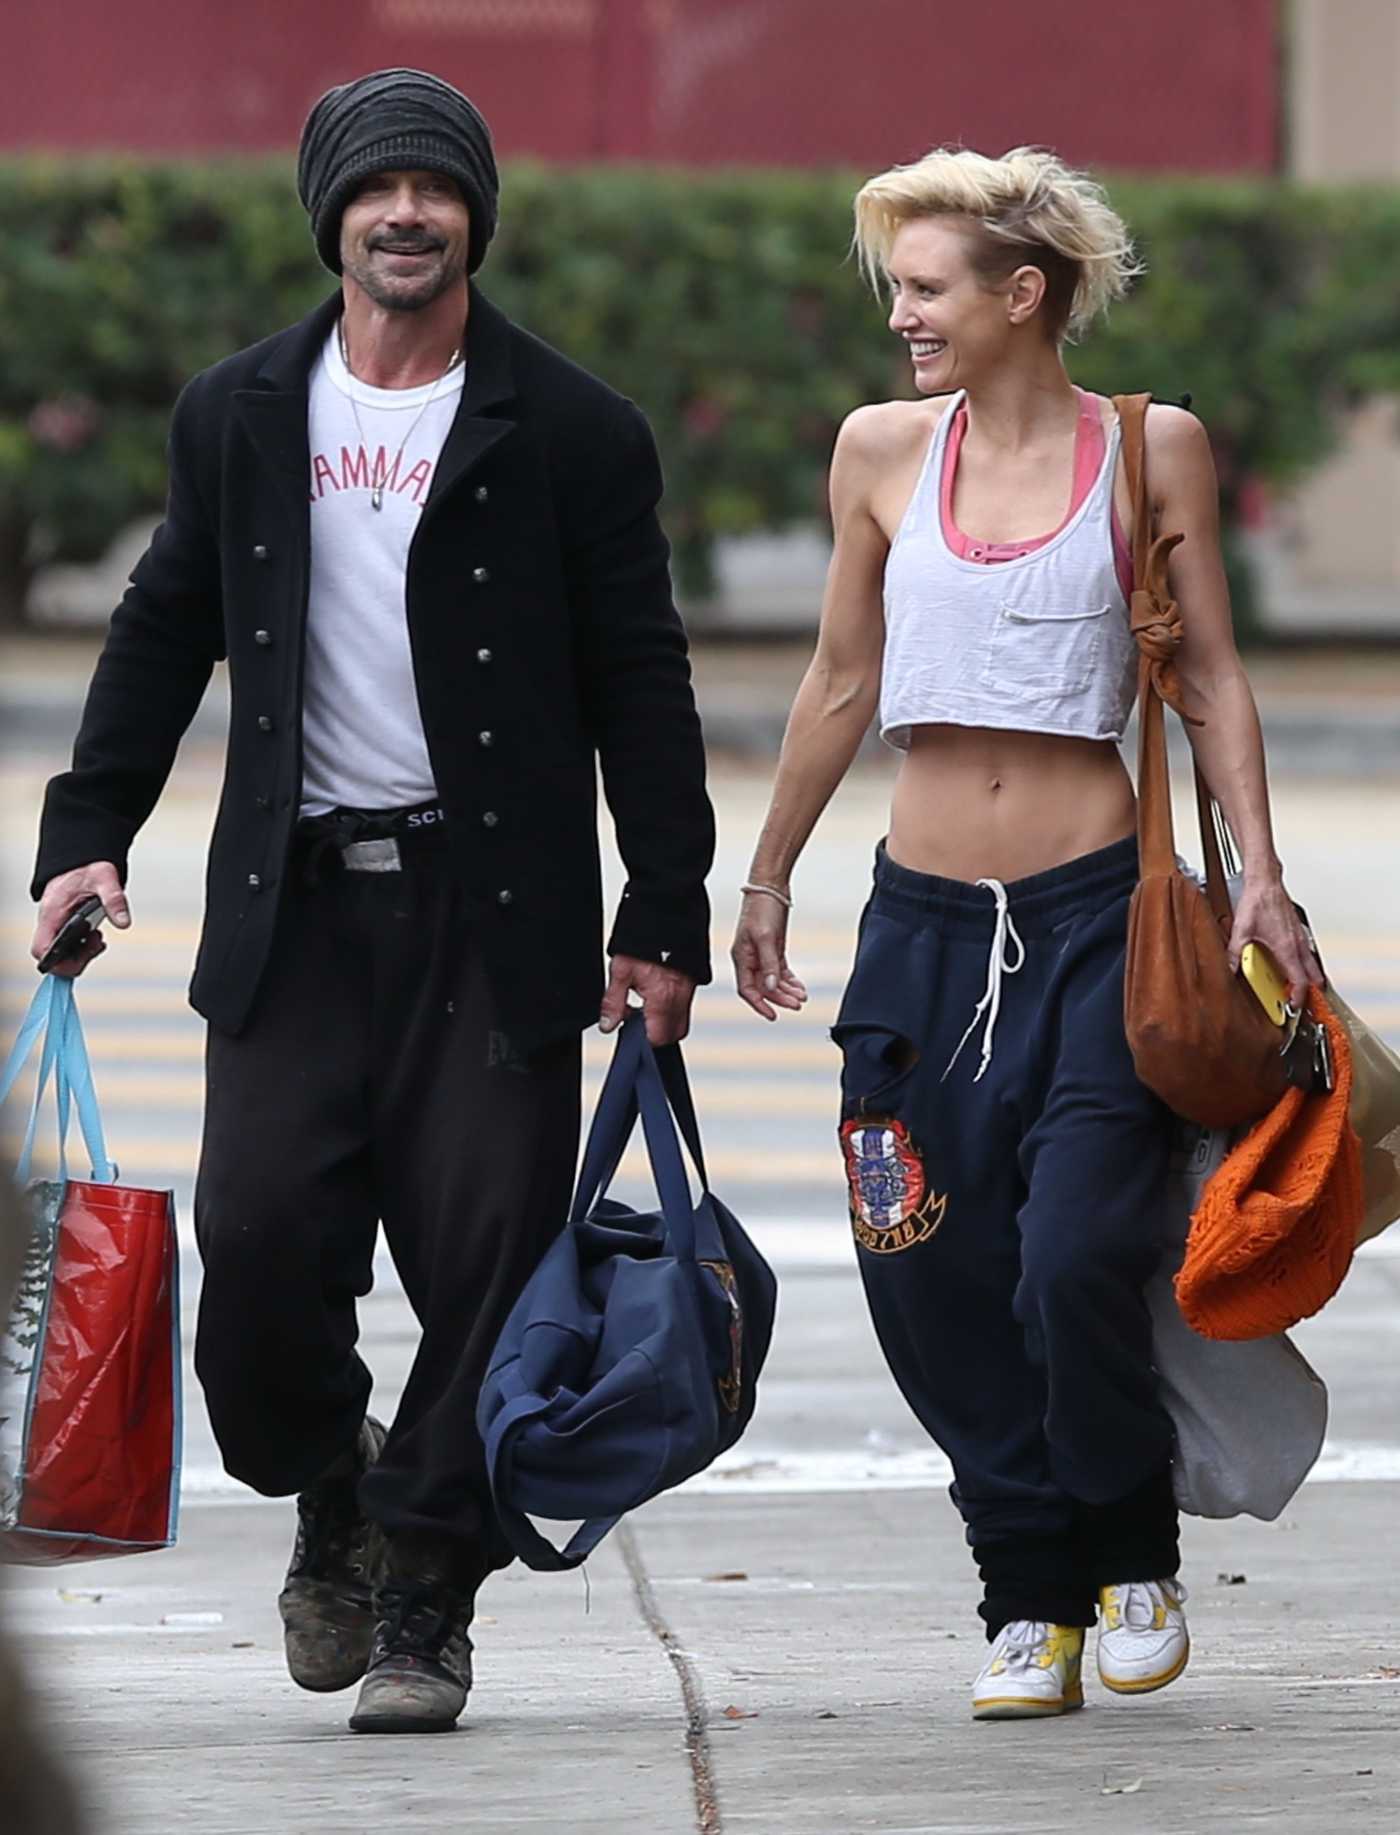 Nicky Whelan in a White Cropped Tank Top Leaves a Private Boxing Gym in Los Angeles 01/26/2021